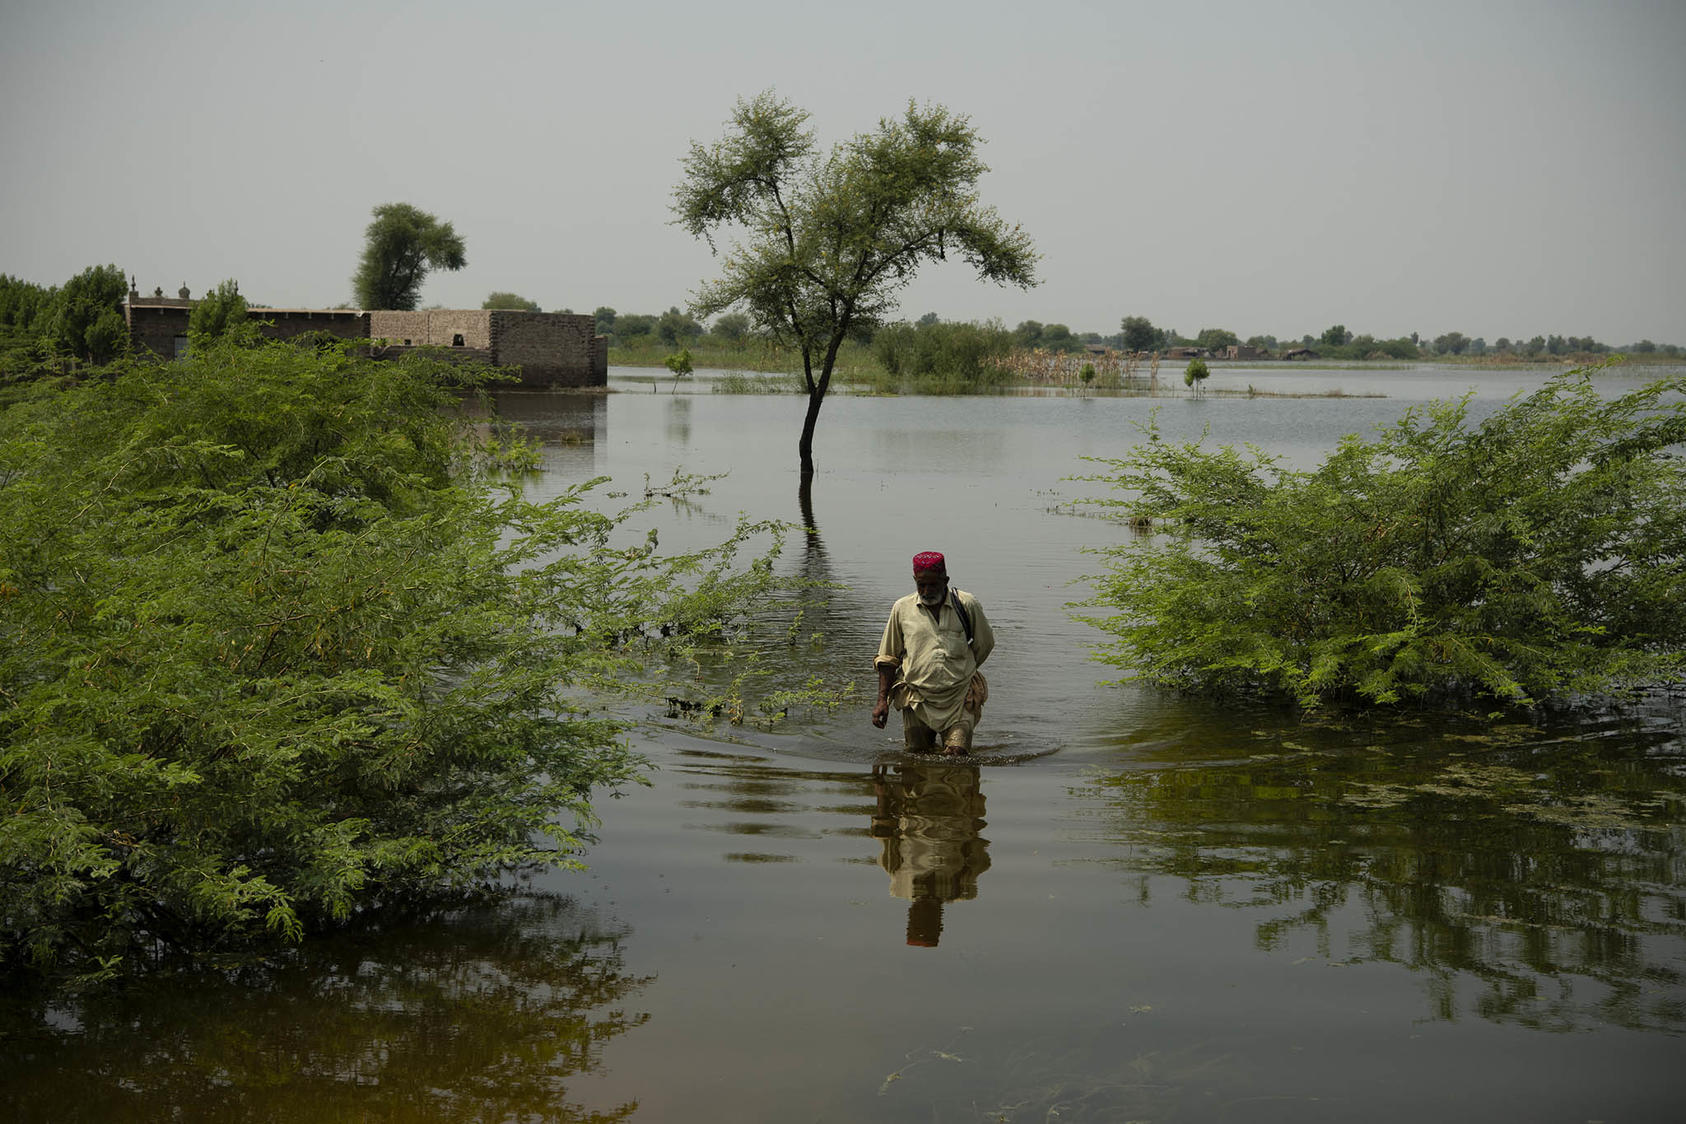 A man walks through his farm, which remains flooded three weeks after heavy rains, in Nawabshah, Pakistan. September 15, 2022. (Kiana Hayeri/The New York Times)